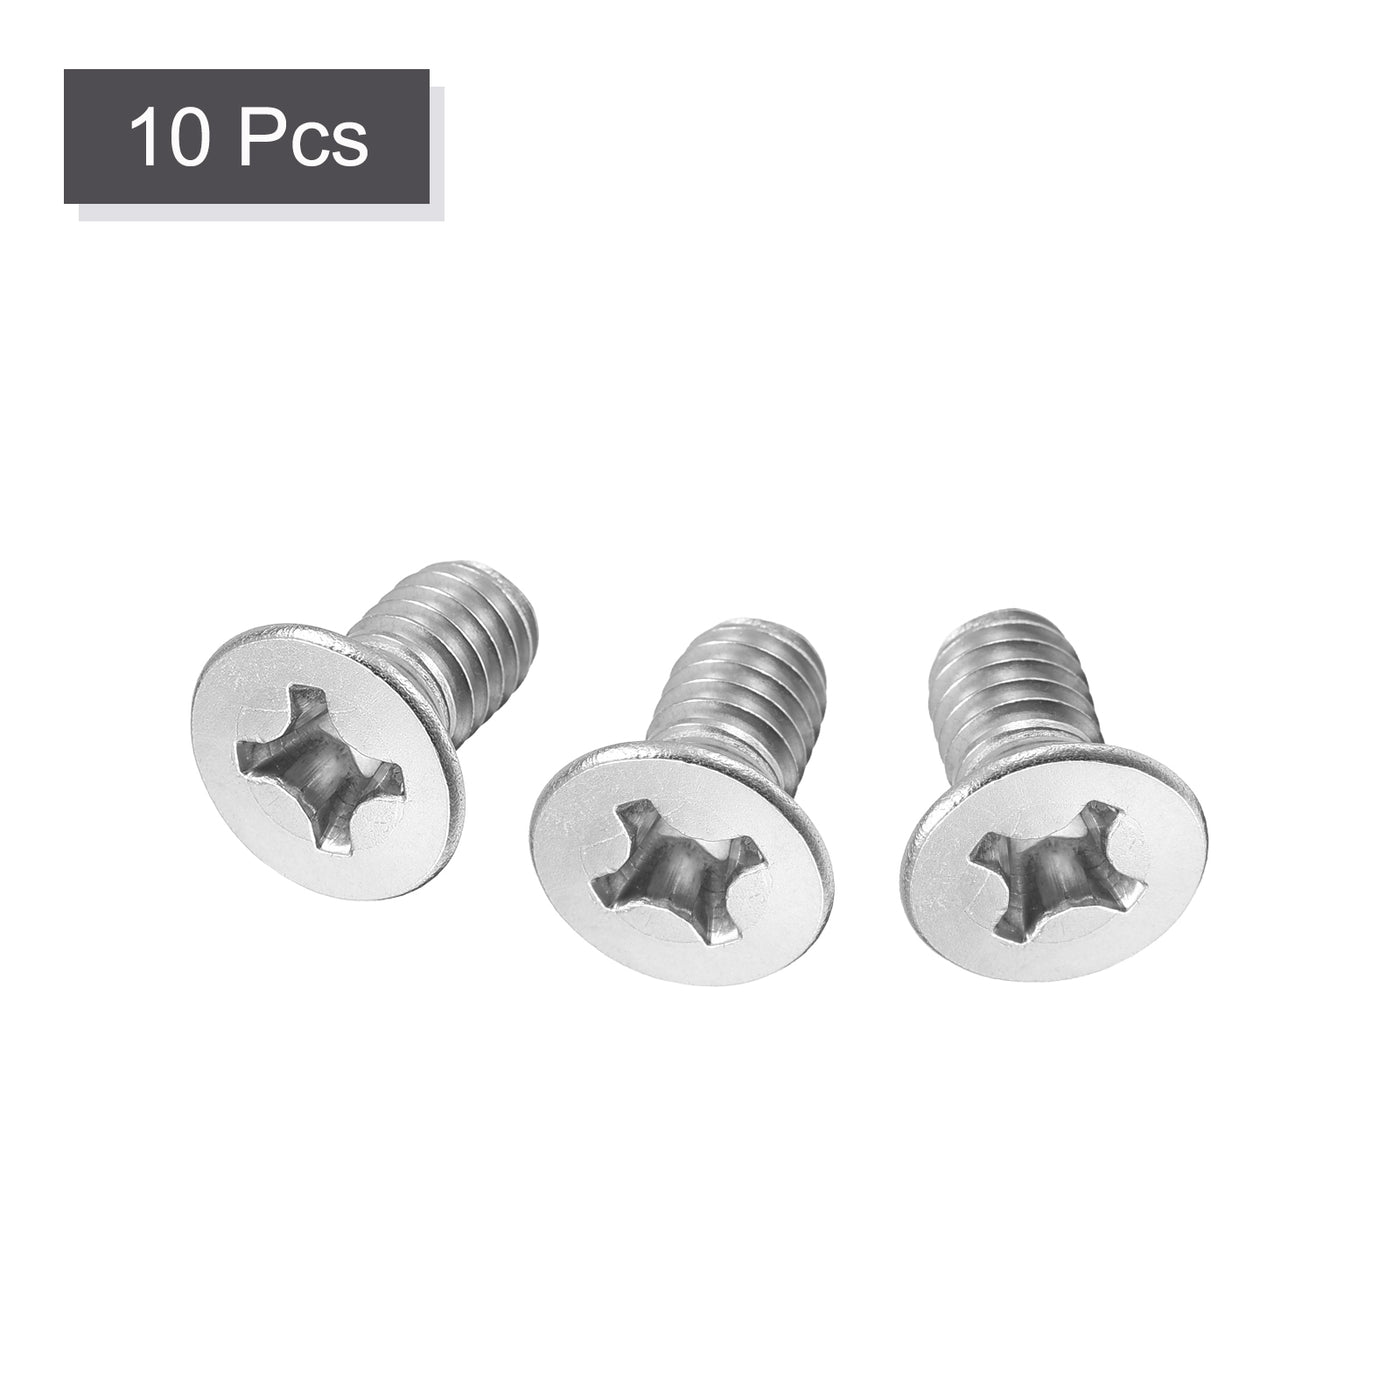 uxcell Uxcell 5/16-18x5/8" Flat Head Machine Screws Phillips 304 Stainless Steel Bolts 10pcs